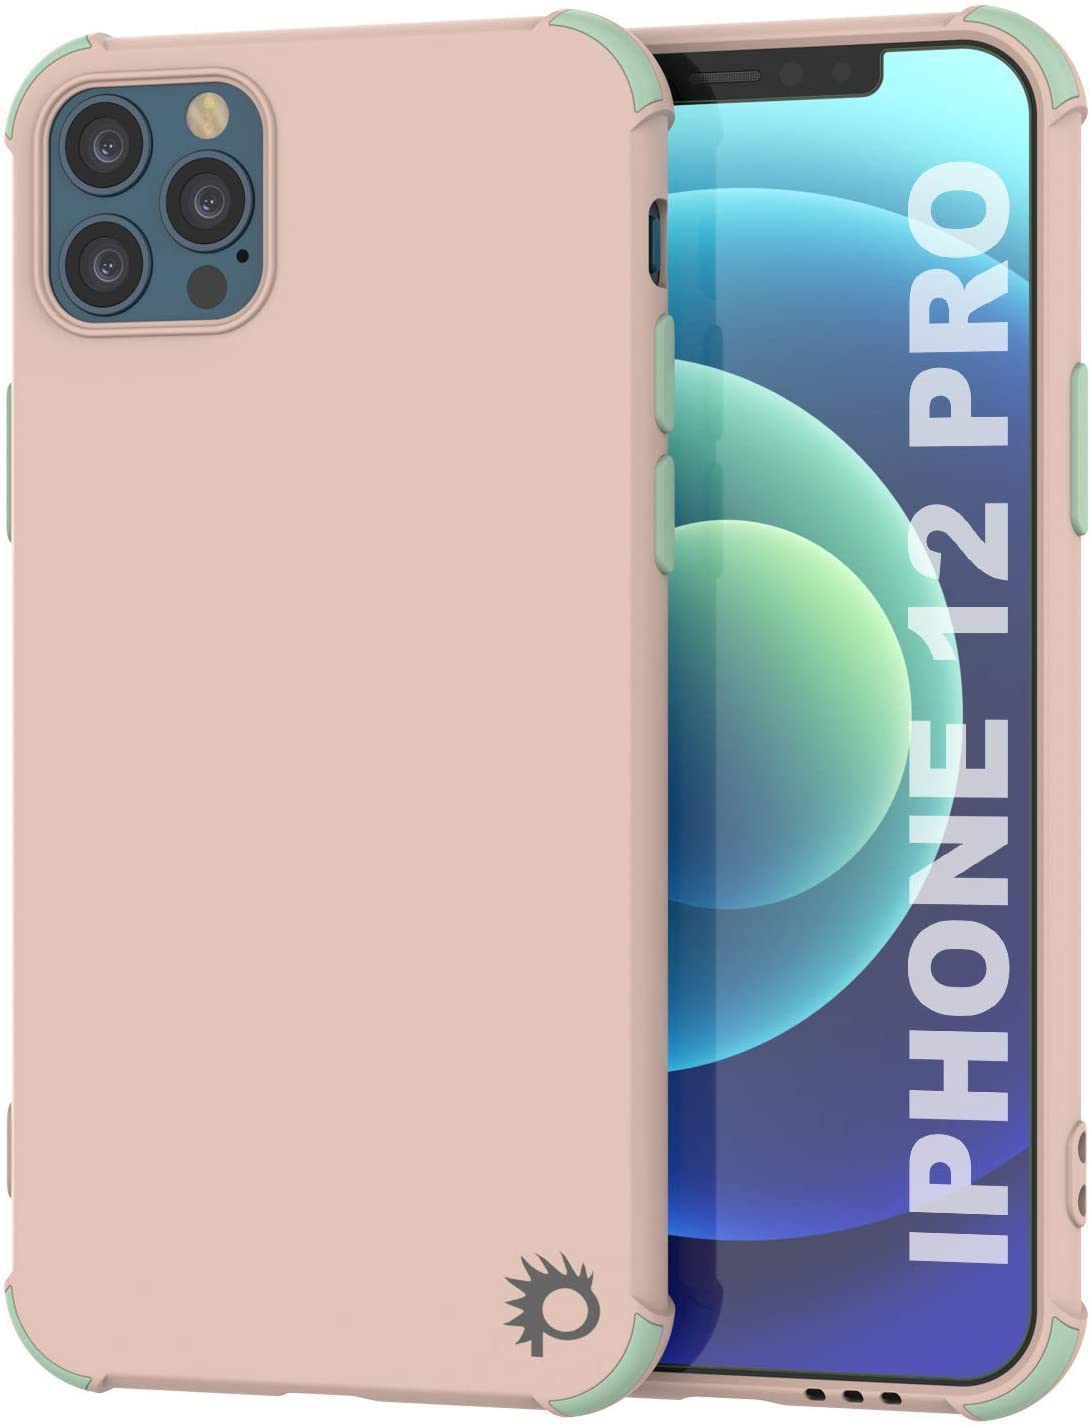 Punkcase Protective & Lightweight TPU Case [Sunshine Series] for iPhone 12 Pro [Pink]